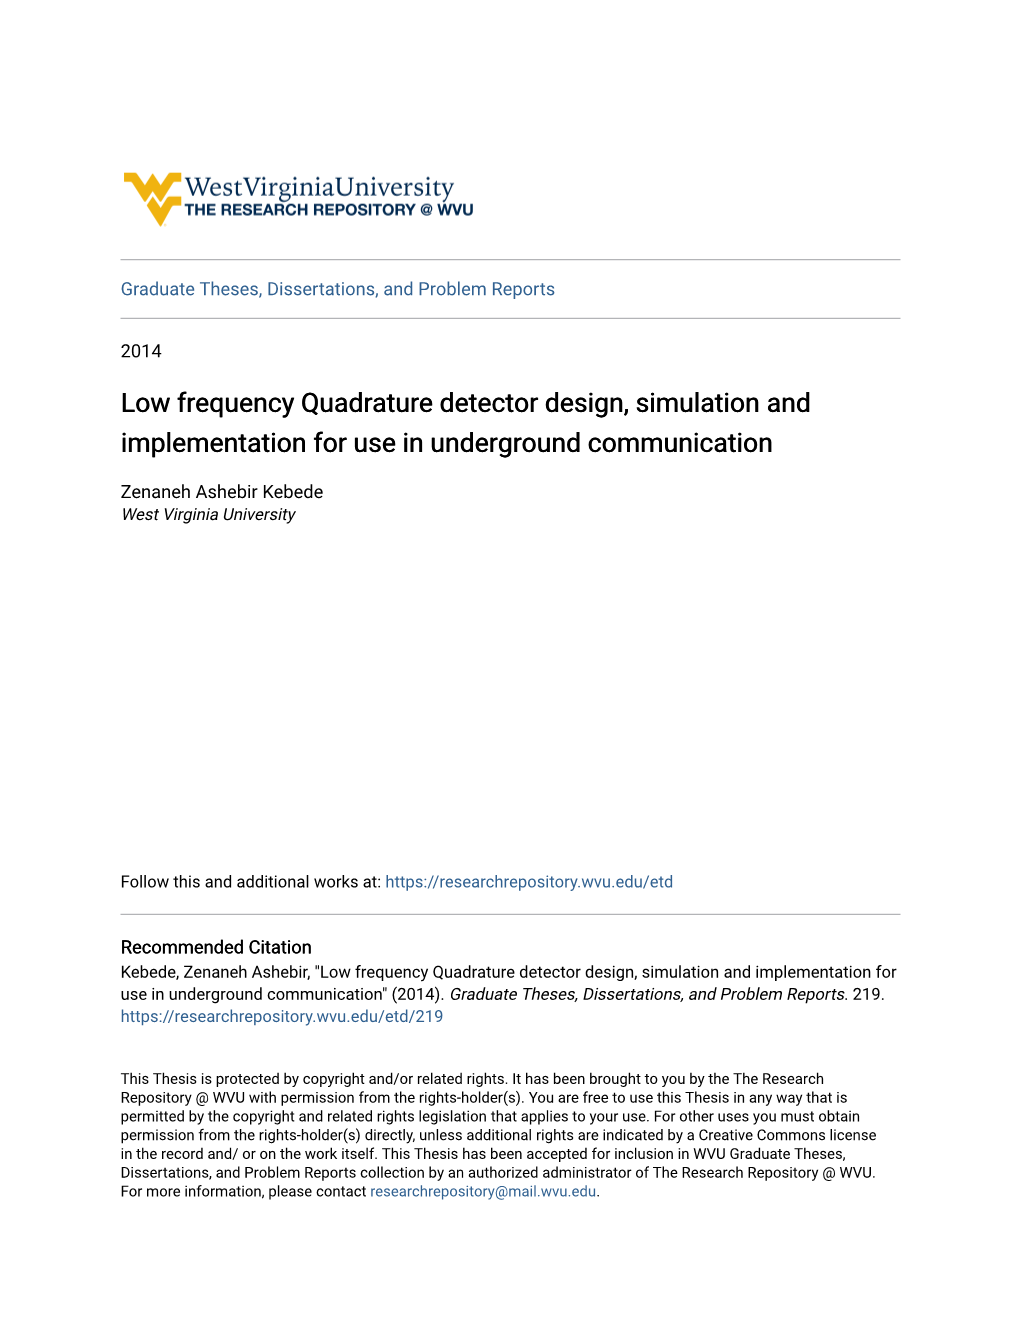 Low Frequency Quadrature Detector Design, Simulation and Implementation for Use in Underground Communication